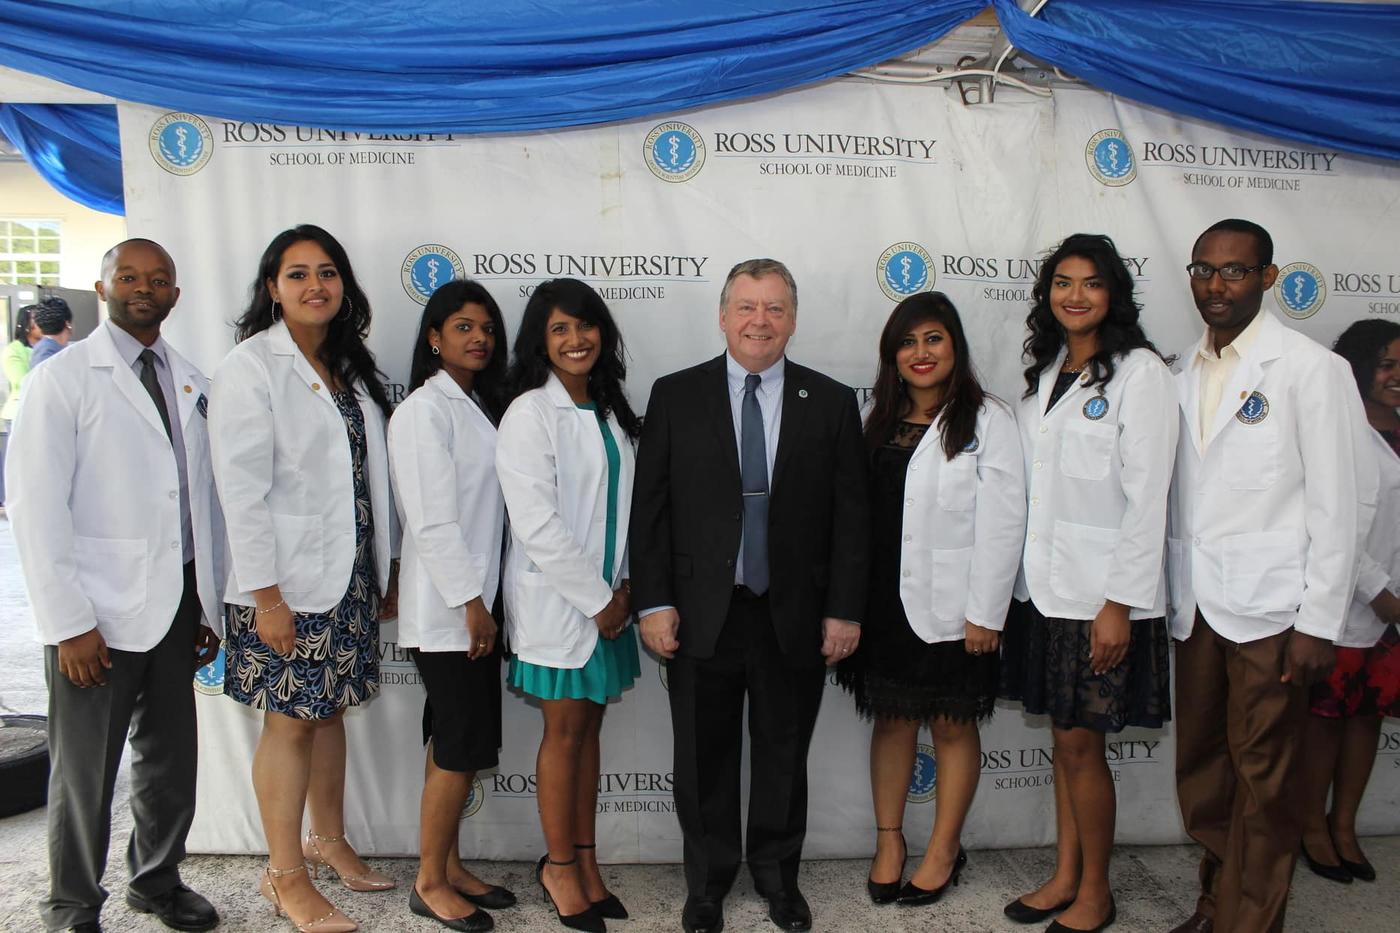 The Dean with students and their new white coats